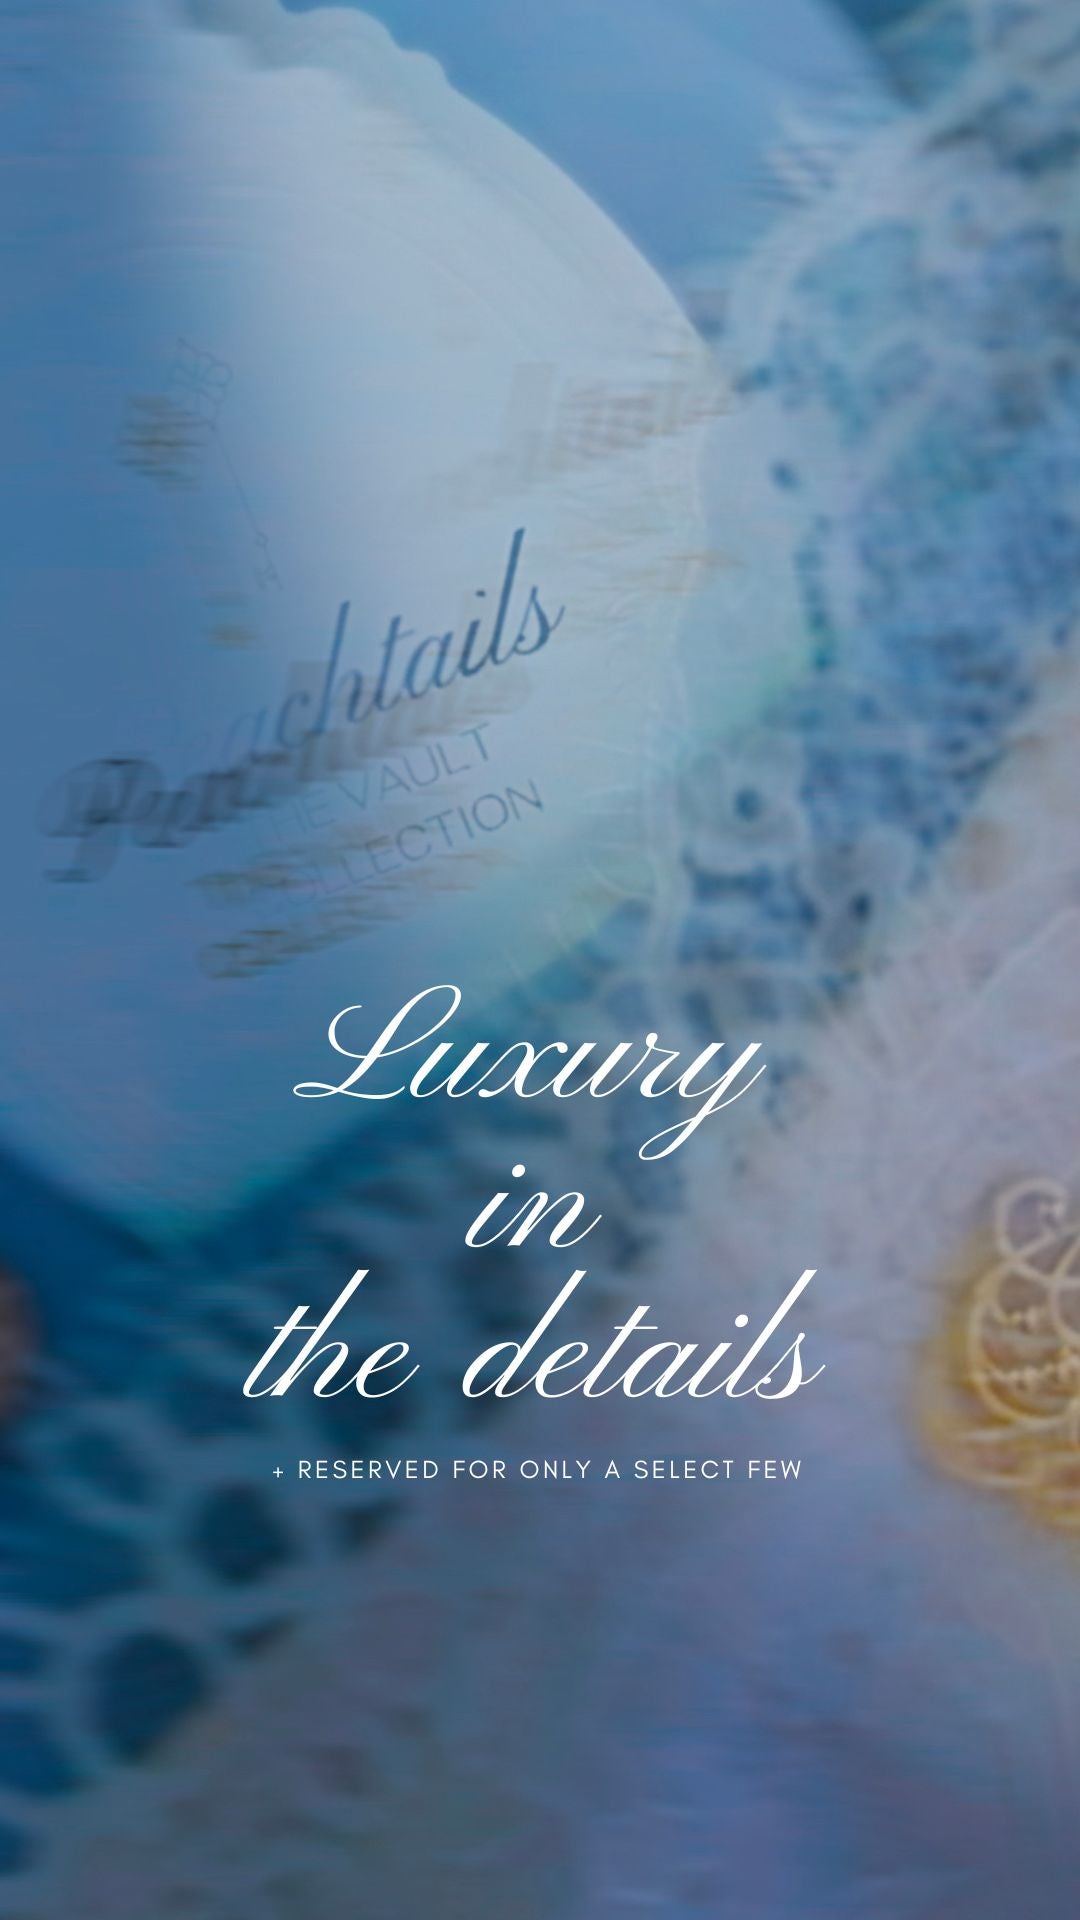 The image features an ethereal blue-toned backdrop with a translucent overlay that reads "Peachtails THE VAULT COLLECTION." It has a central message "Luxury in the details," in elegant cursive script, followed by a smaller caption "RESERVED FOR ONLY A SELECT FEW" at the bottom, suggesting exclusivity and high-end quality. The overall effect is one of sophistication and exclusivity, implying a special offering from the brand.